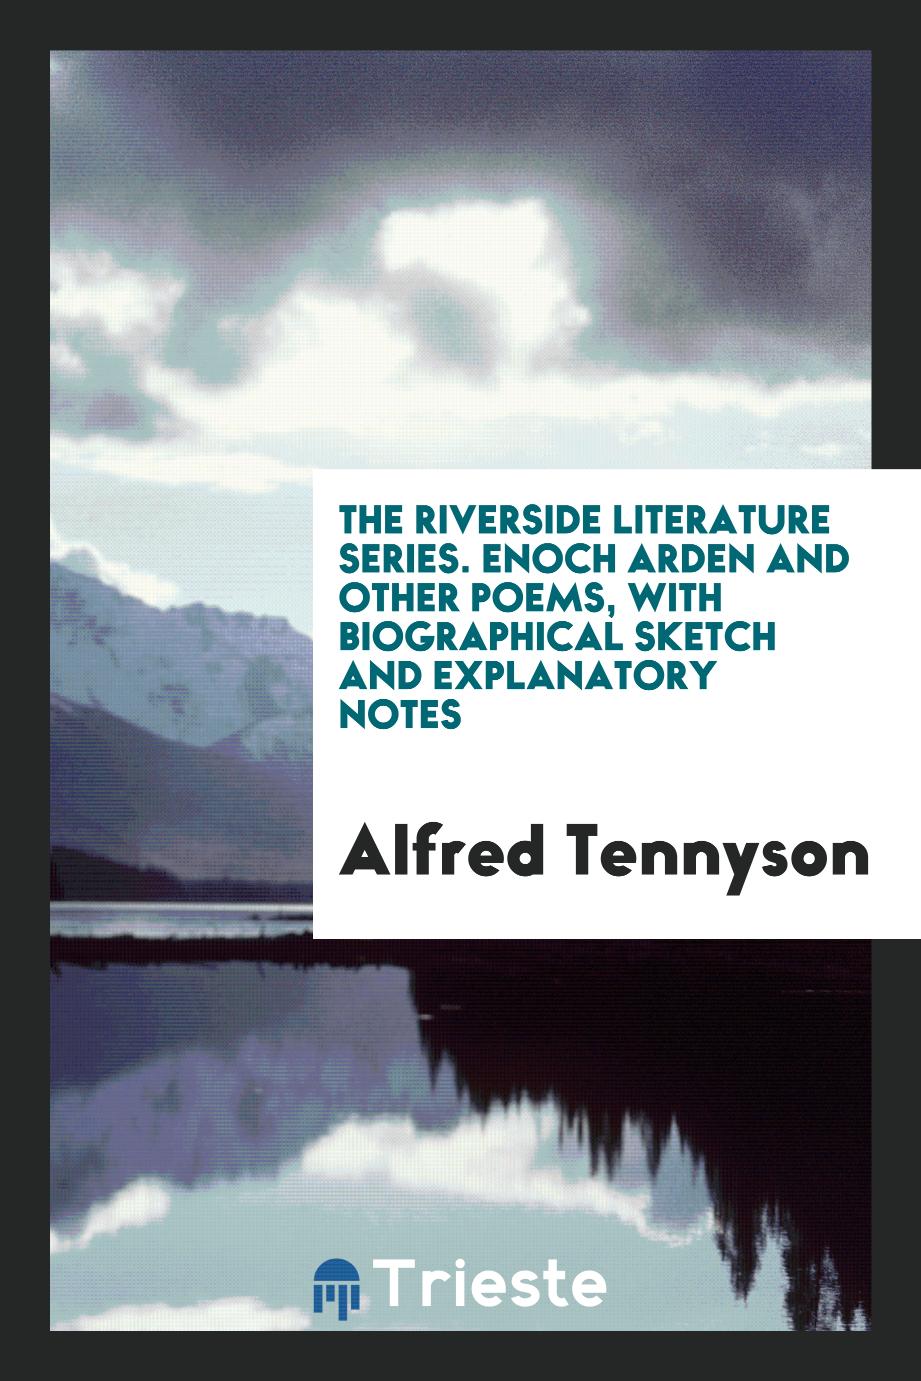 The Riverside Literature Series. Enoch Arden and Other Poems, with Biographical Sketch and Explanatory Notes